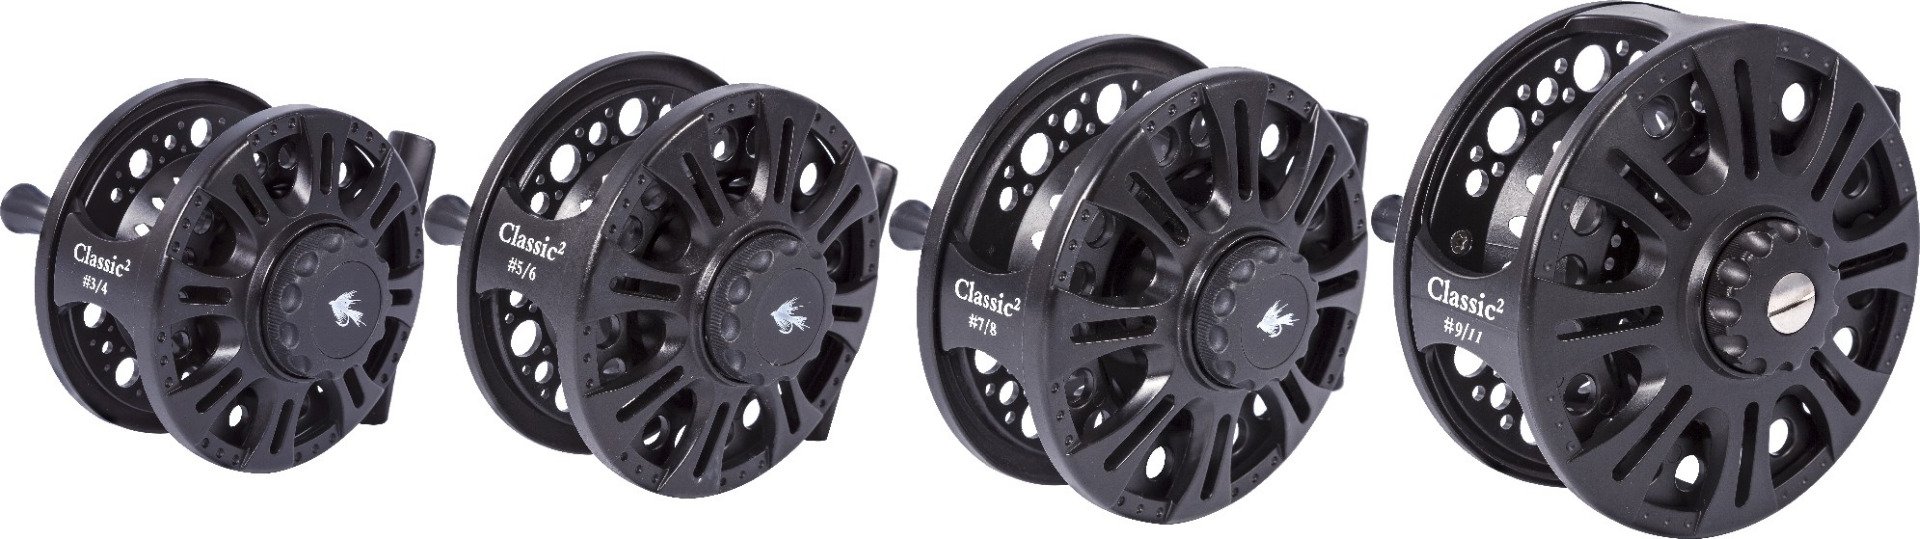 Reel Fly Fishing Classic range sums up what Snowbee is famous for..... top quality product at mid range prices. This superb reel is precision molded from glass fiber reinforced nylon, to provide a lightweight rigid frame which is totally corrosion proof.